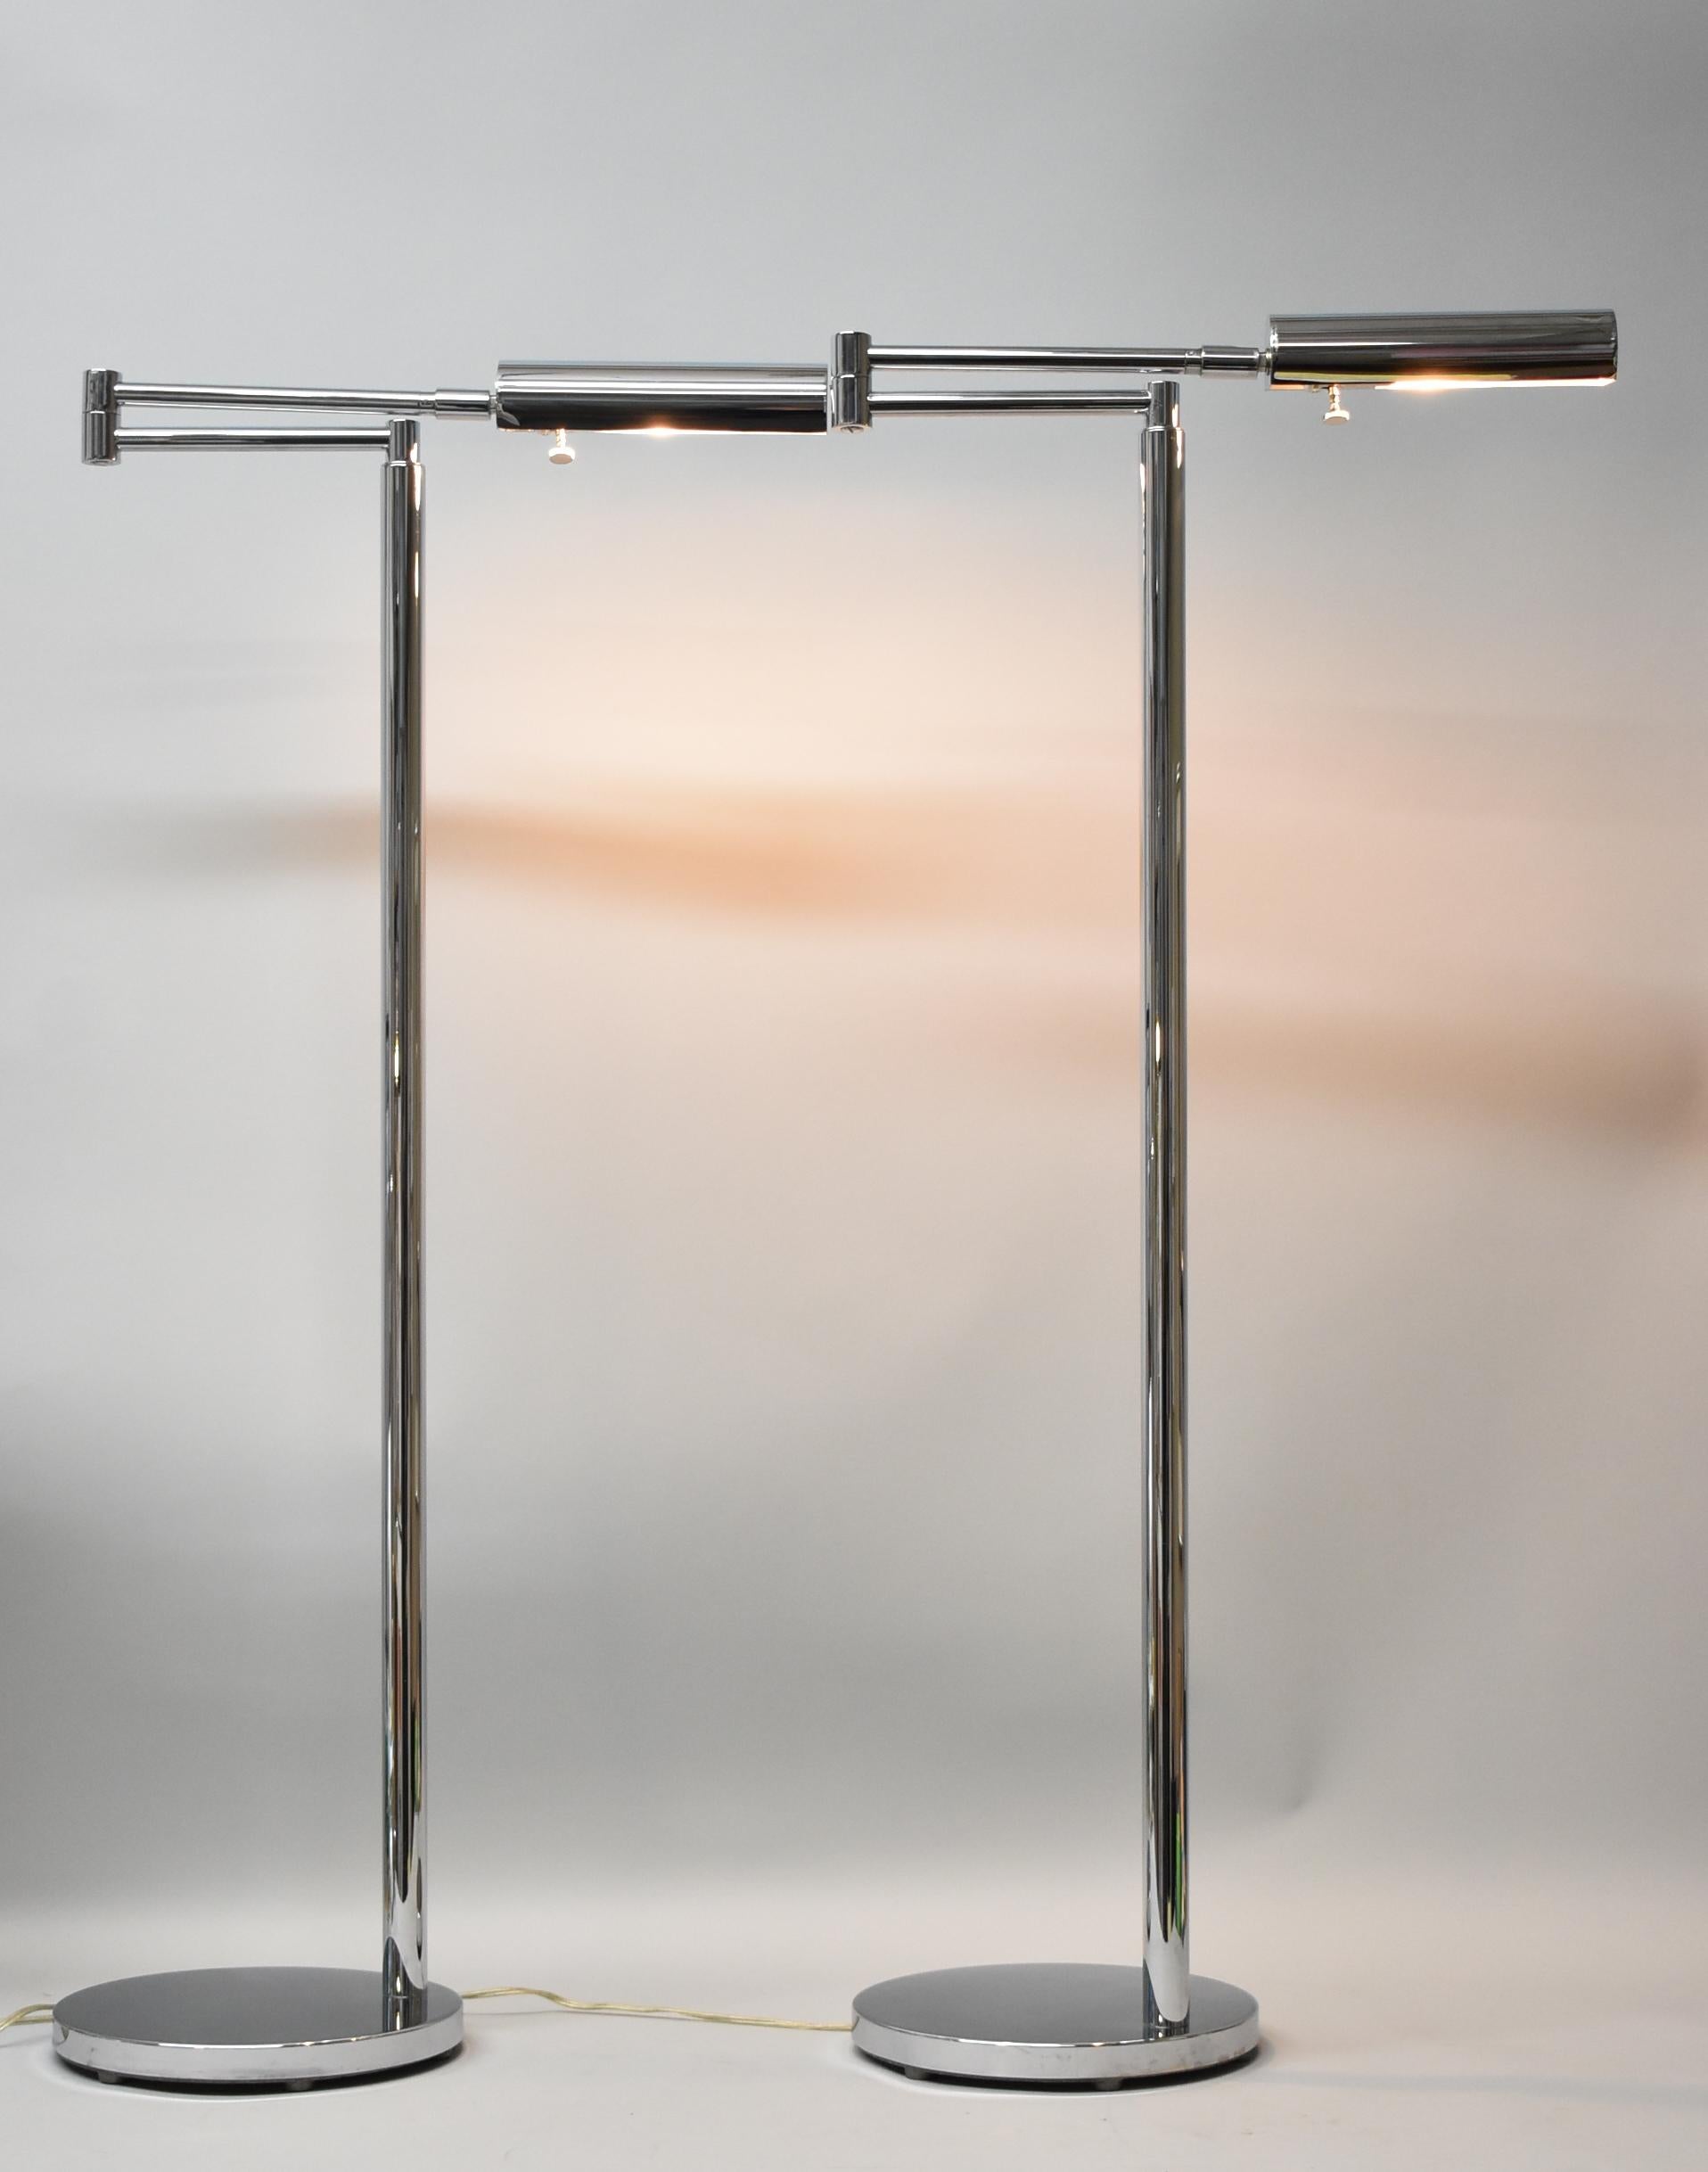 Pair of Mid Century Modern retractable chrome cylinder floor lamps by Nessen Koch & Lowy. Single socket. Shade swivels and rotates. One small dent in the base and light scratches. Dimensions: 10